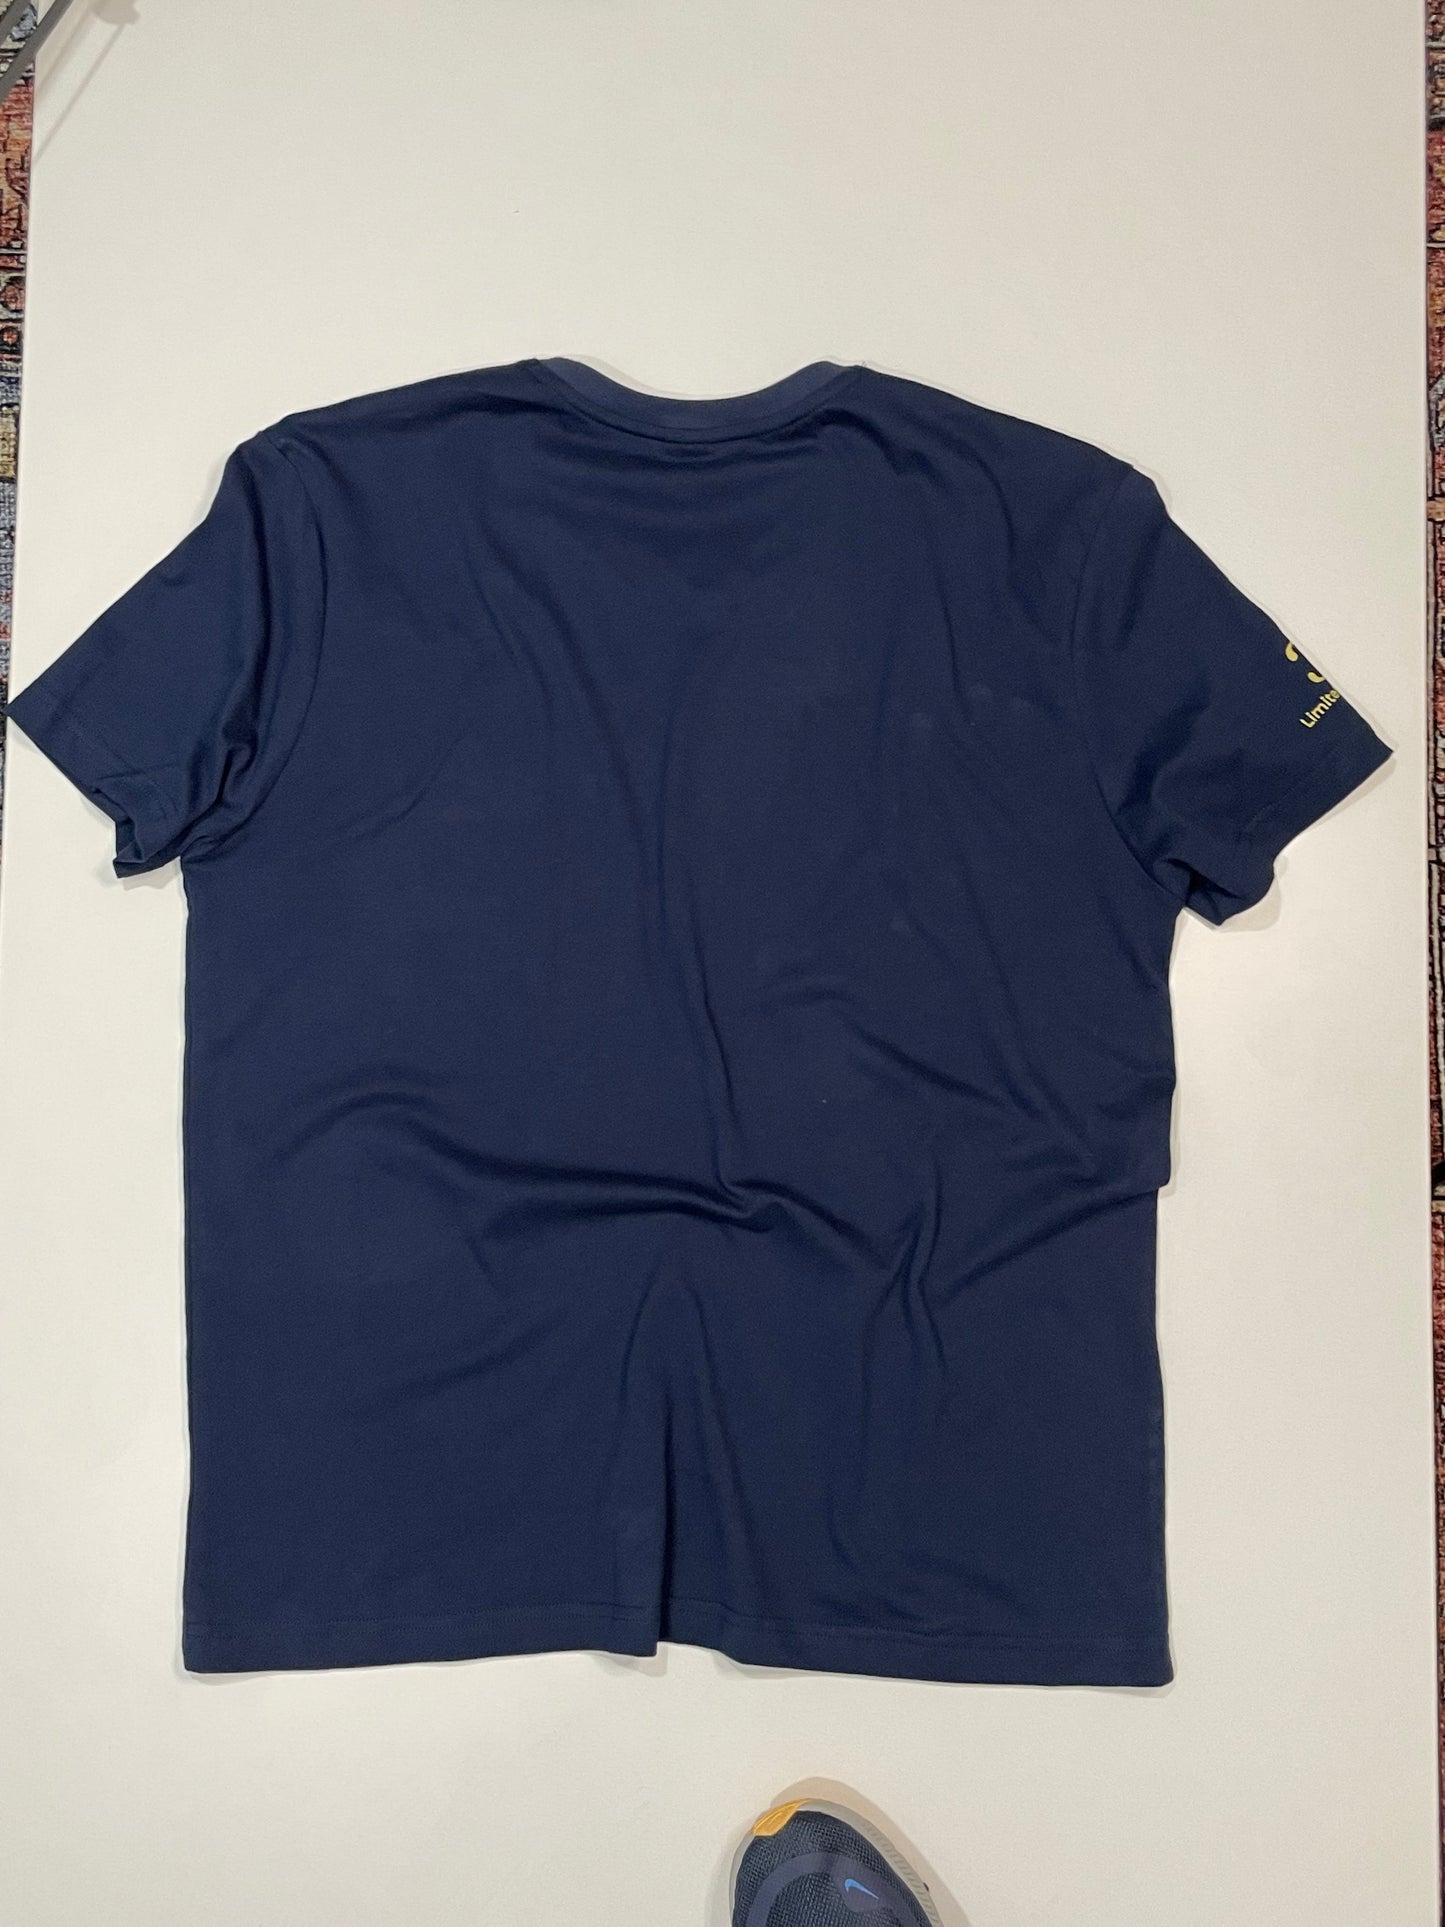 3b Limited Edition Tee - Legacy Navy